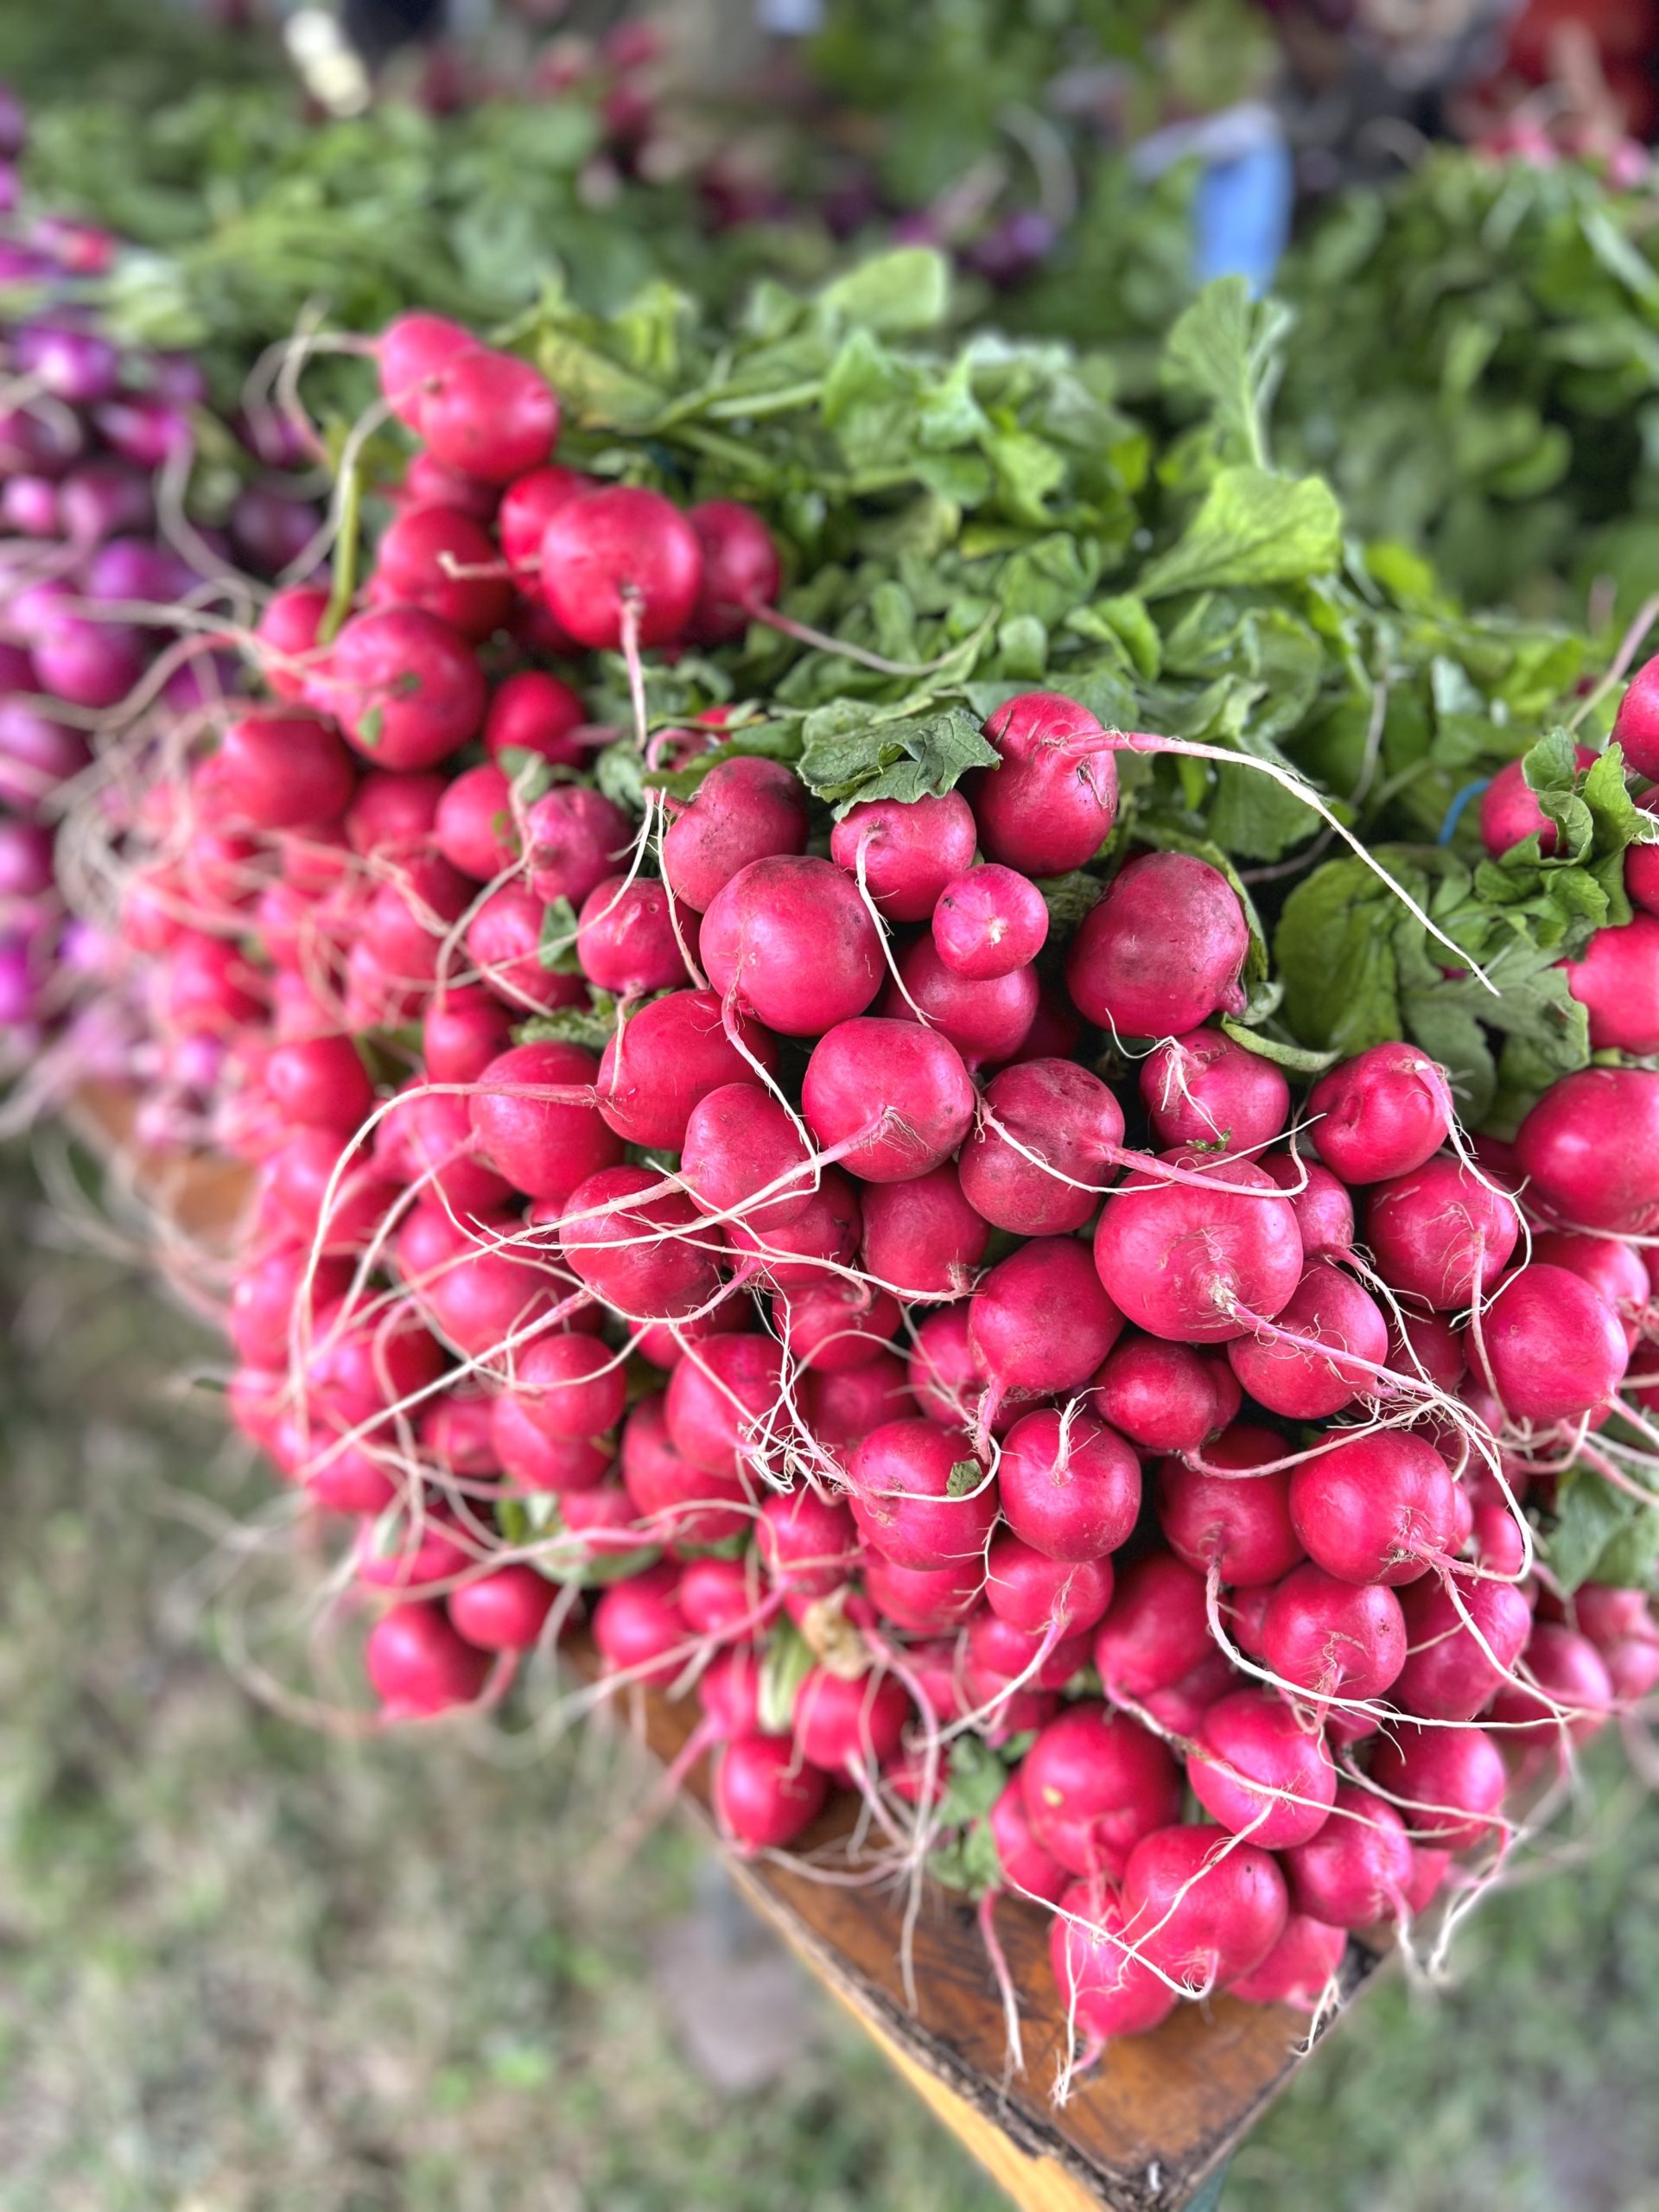 Pink radishes bunched up on a farmer's market table